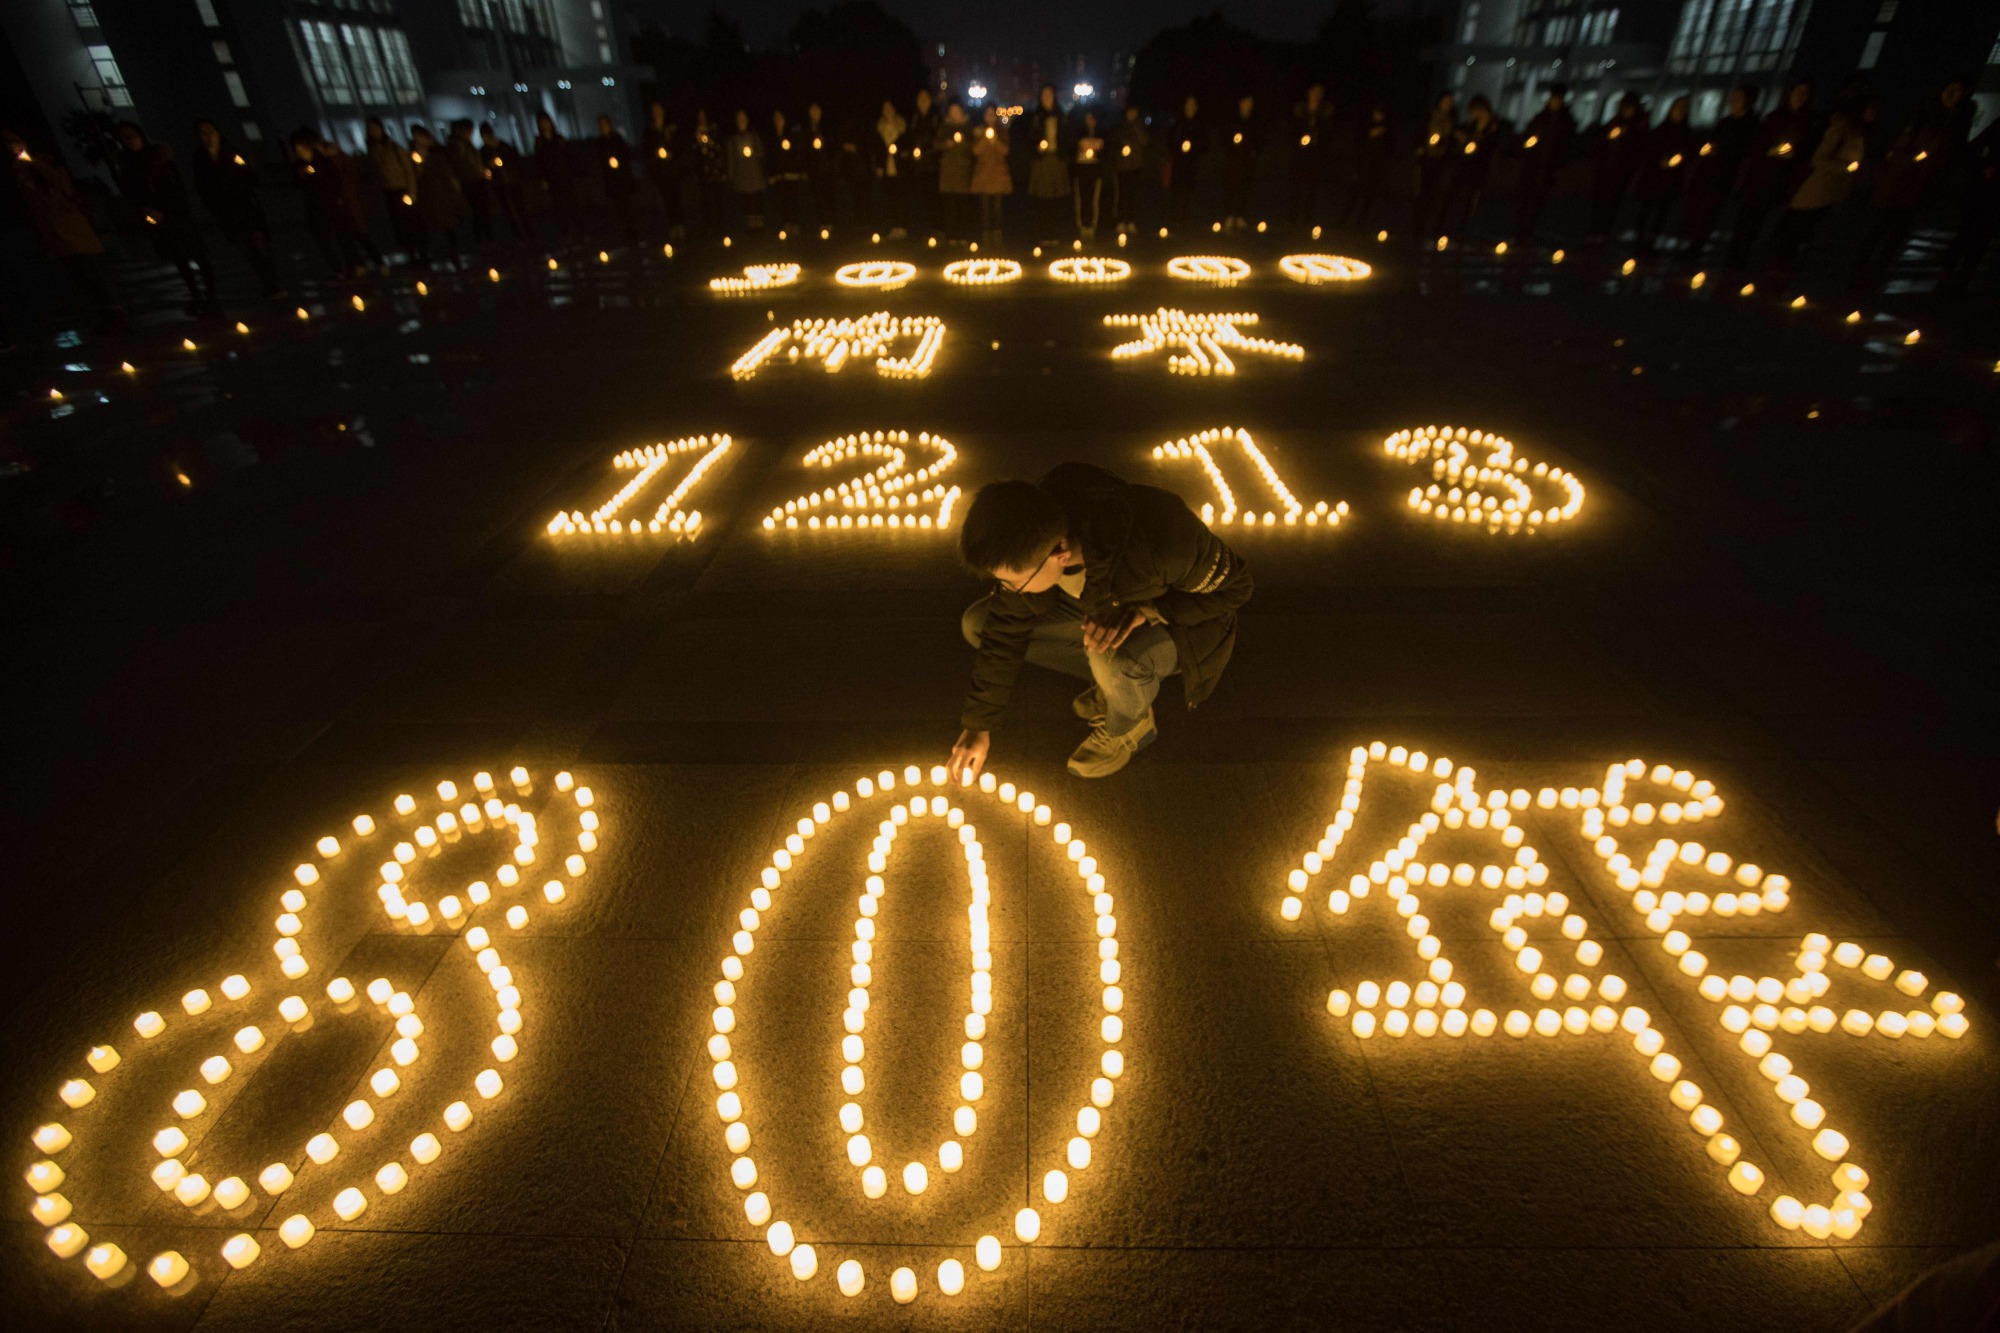 Students light candles at Nanjing Normal University on Dec. 11 during a ceremony ahead of China's Dec. 13 National Memorial Day for Nanjing massacre victims in Nanjing. | AFP-JIJI